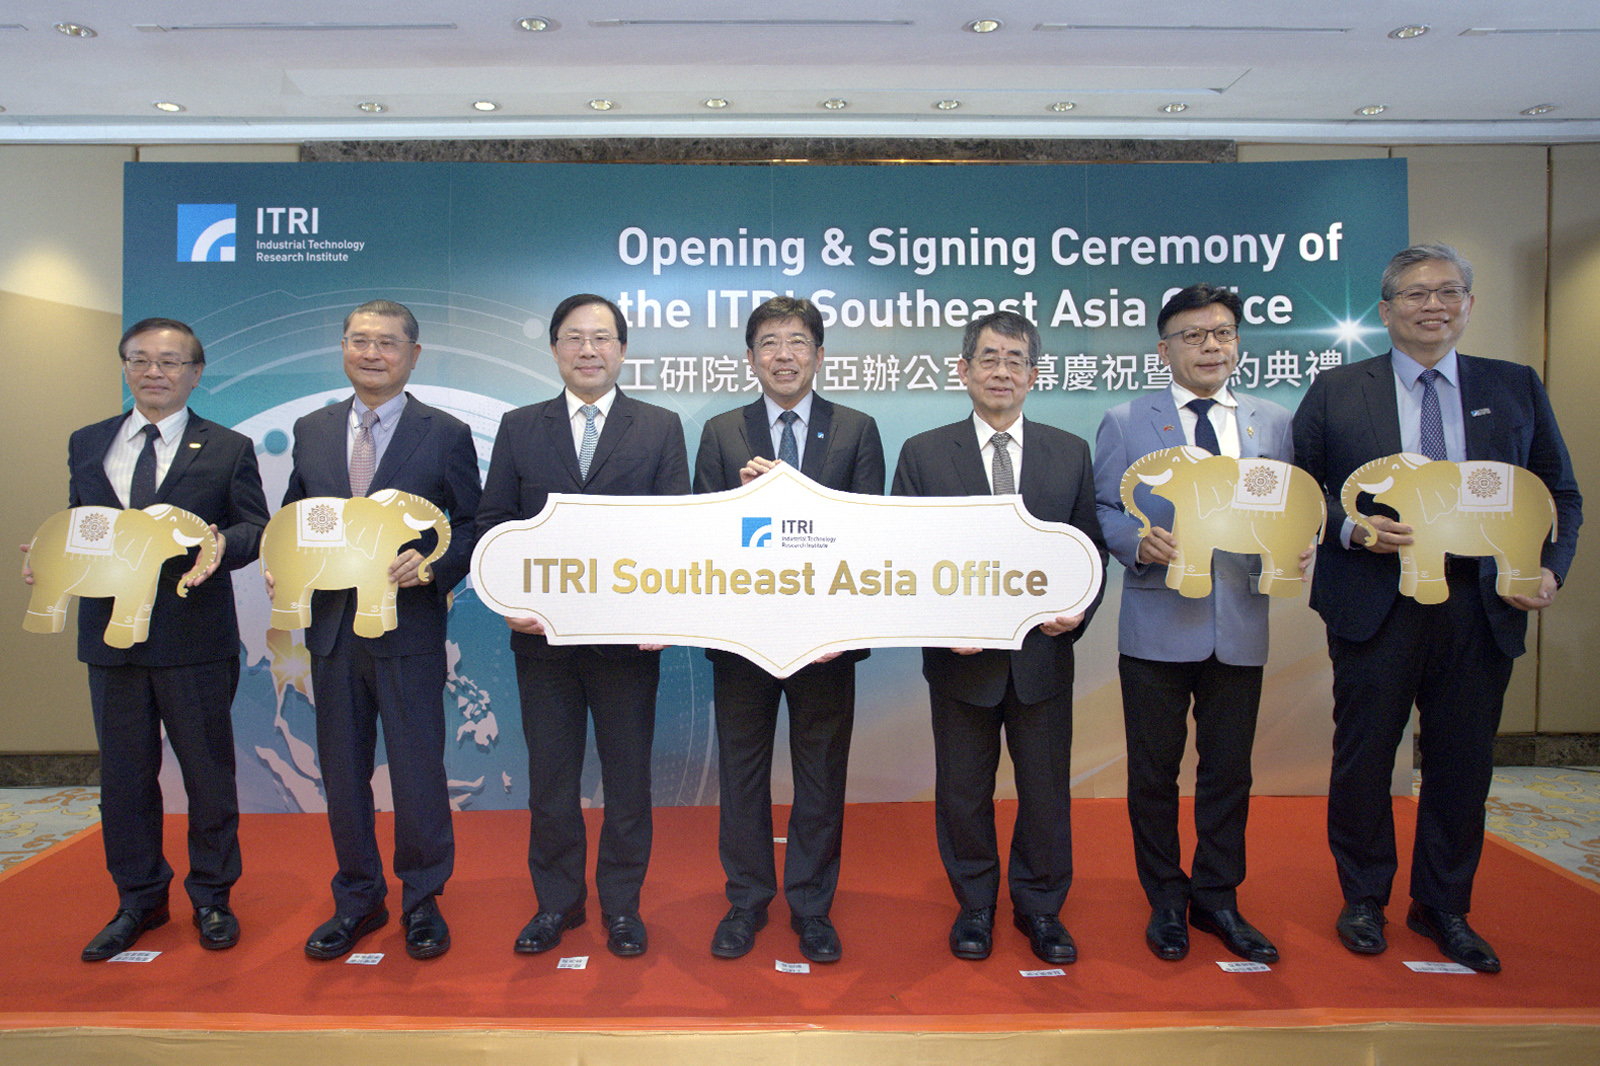 ITRI Establishes Southeast Asia Office to Foster Taiwan-Thailand Collaboration